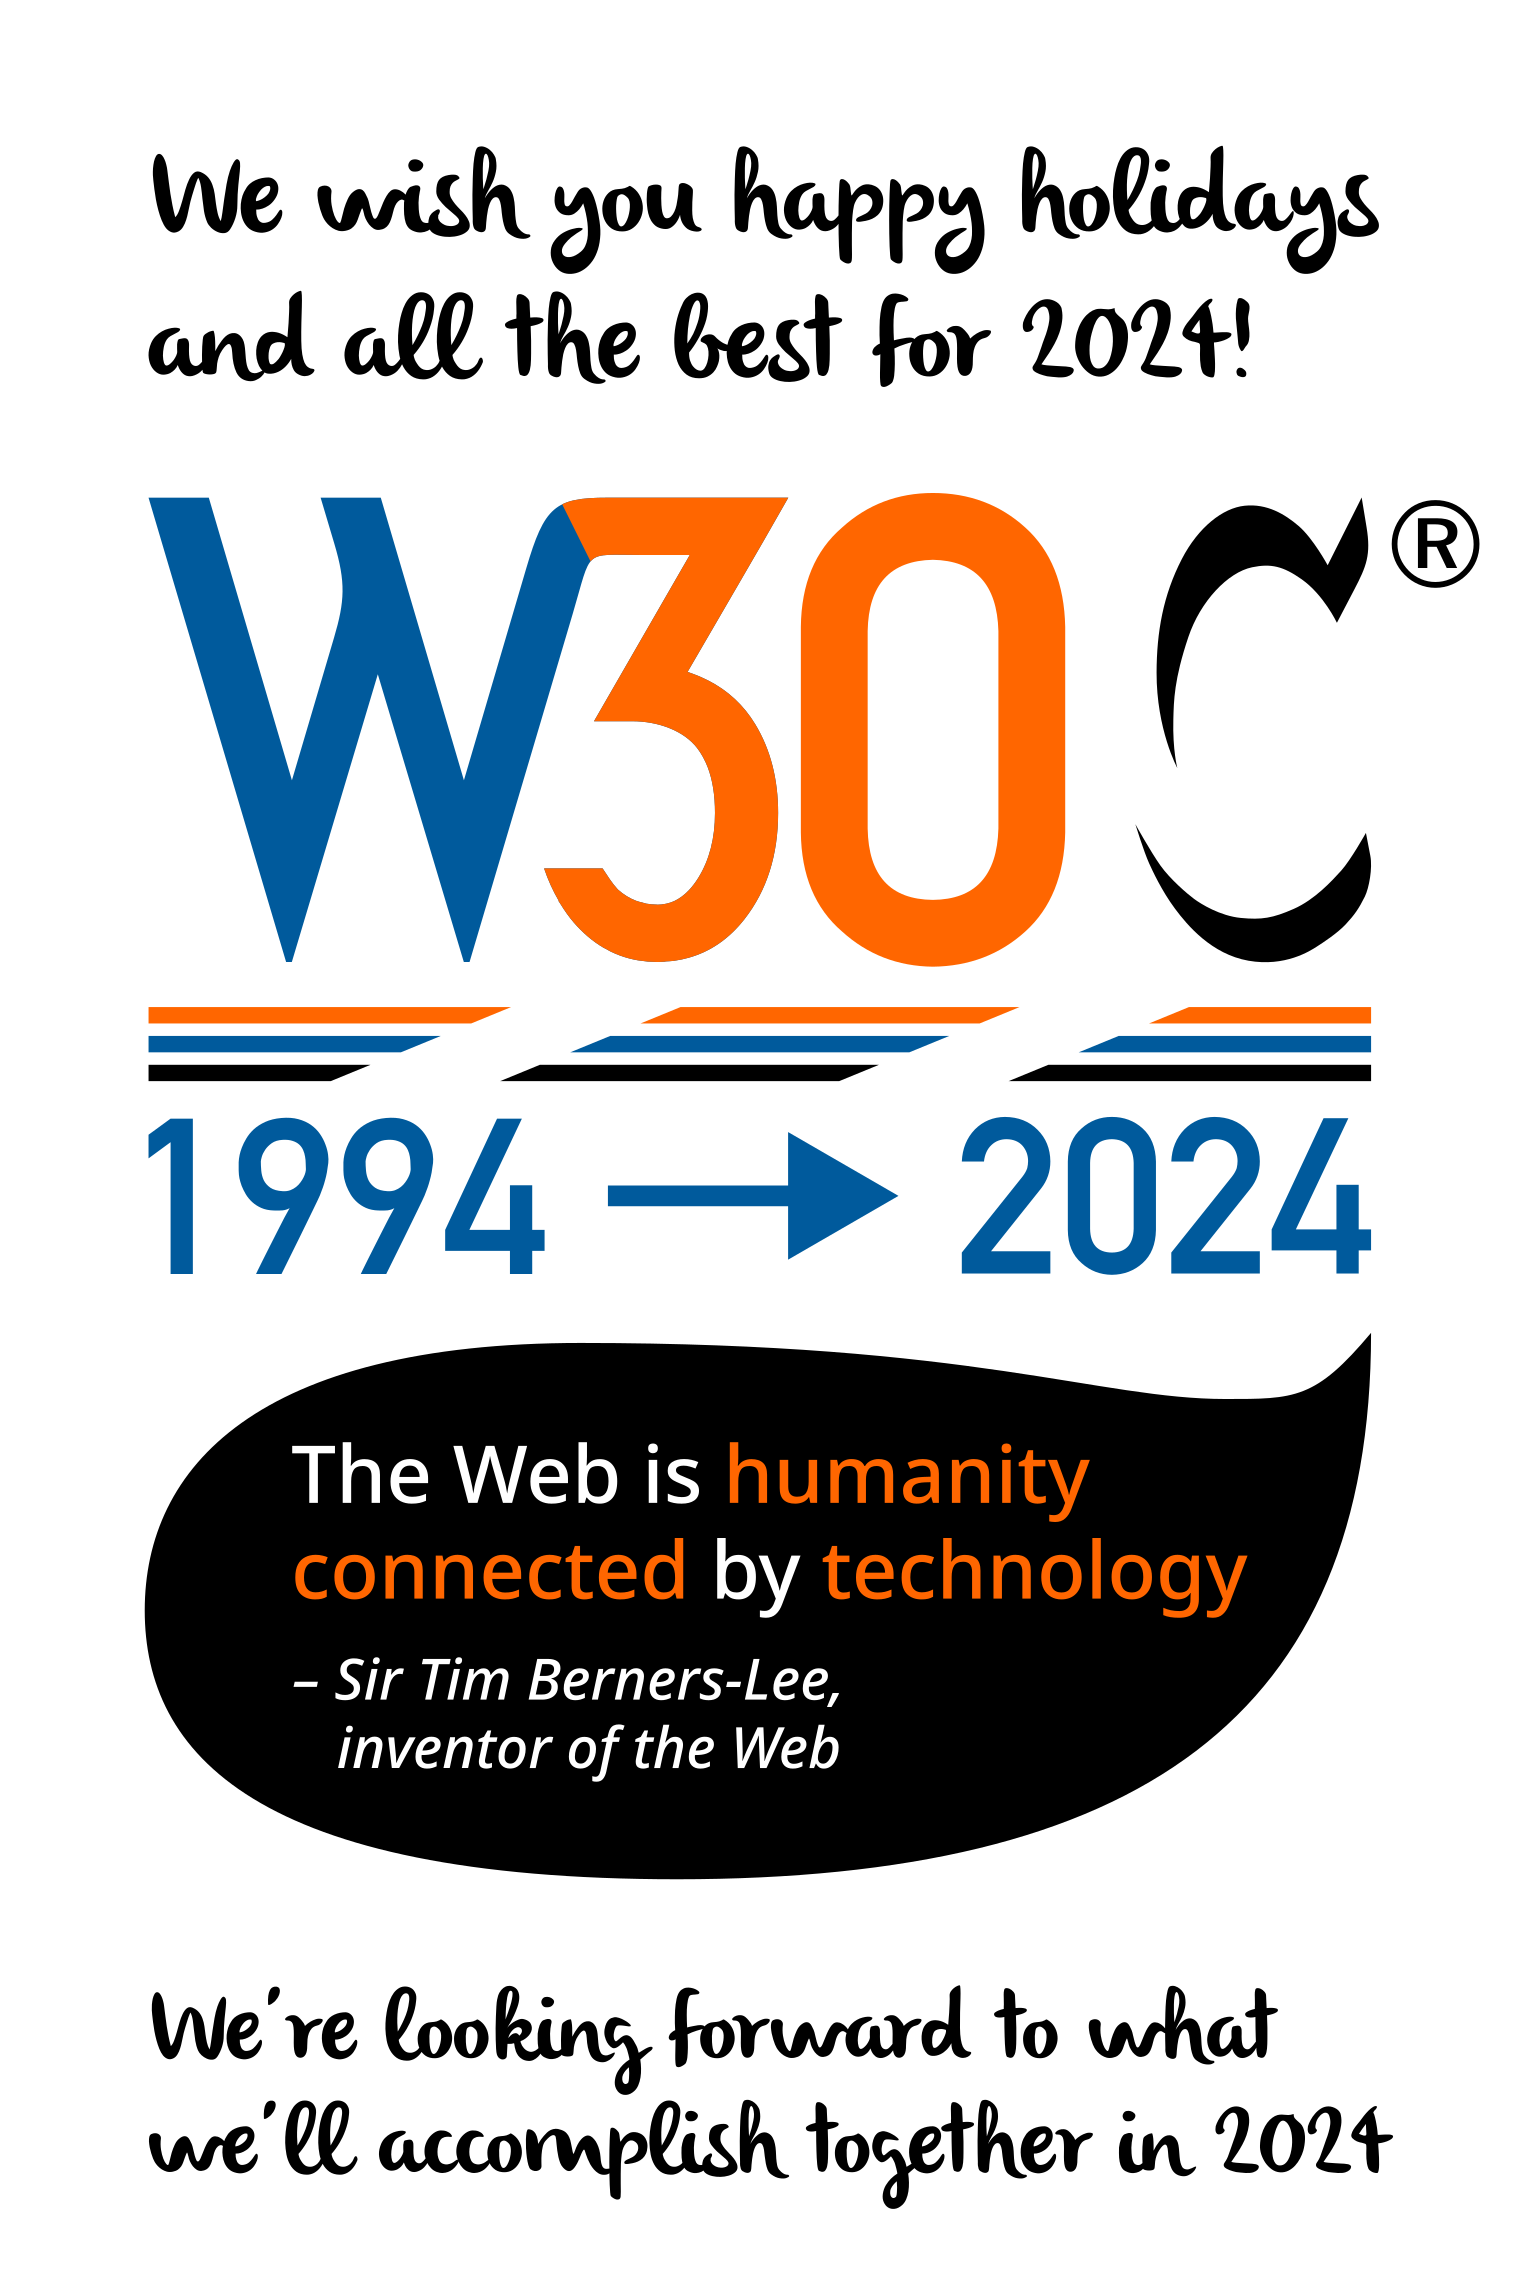 W3C logo turned into W30C (1994-2024), Tim Berners-Lee quote "the web is humanity connected by technology" and our greeting.